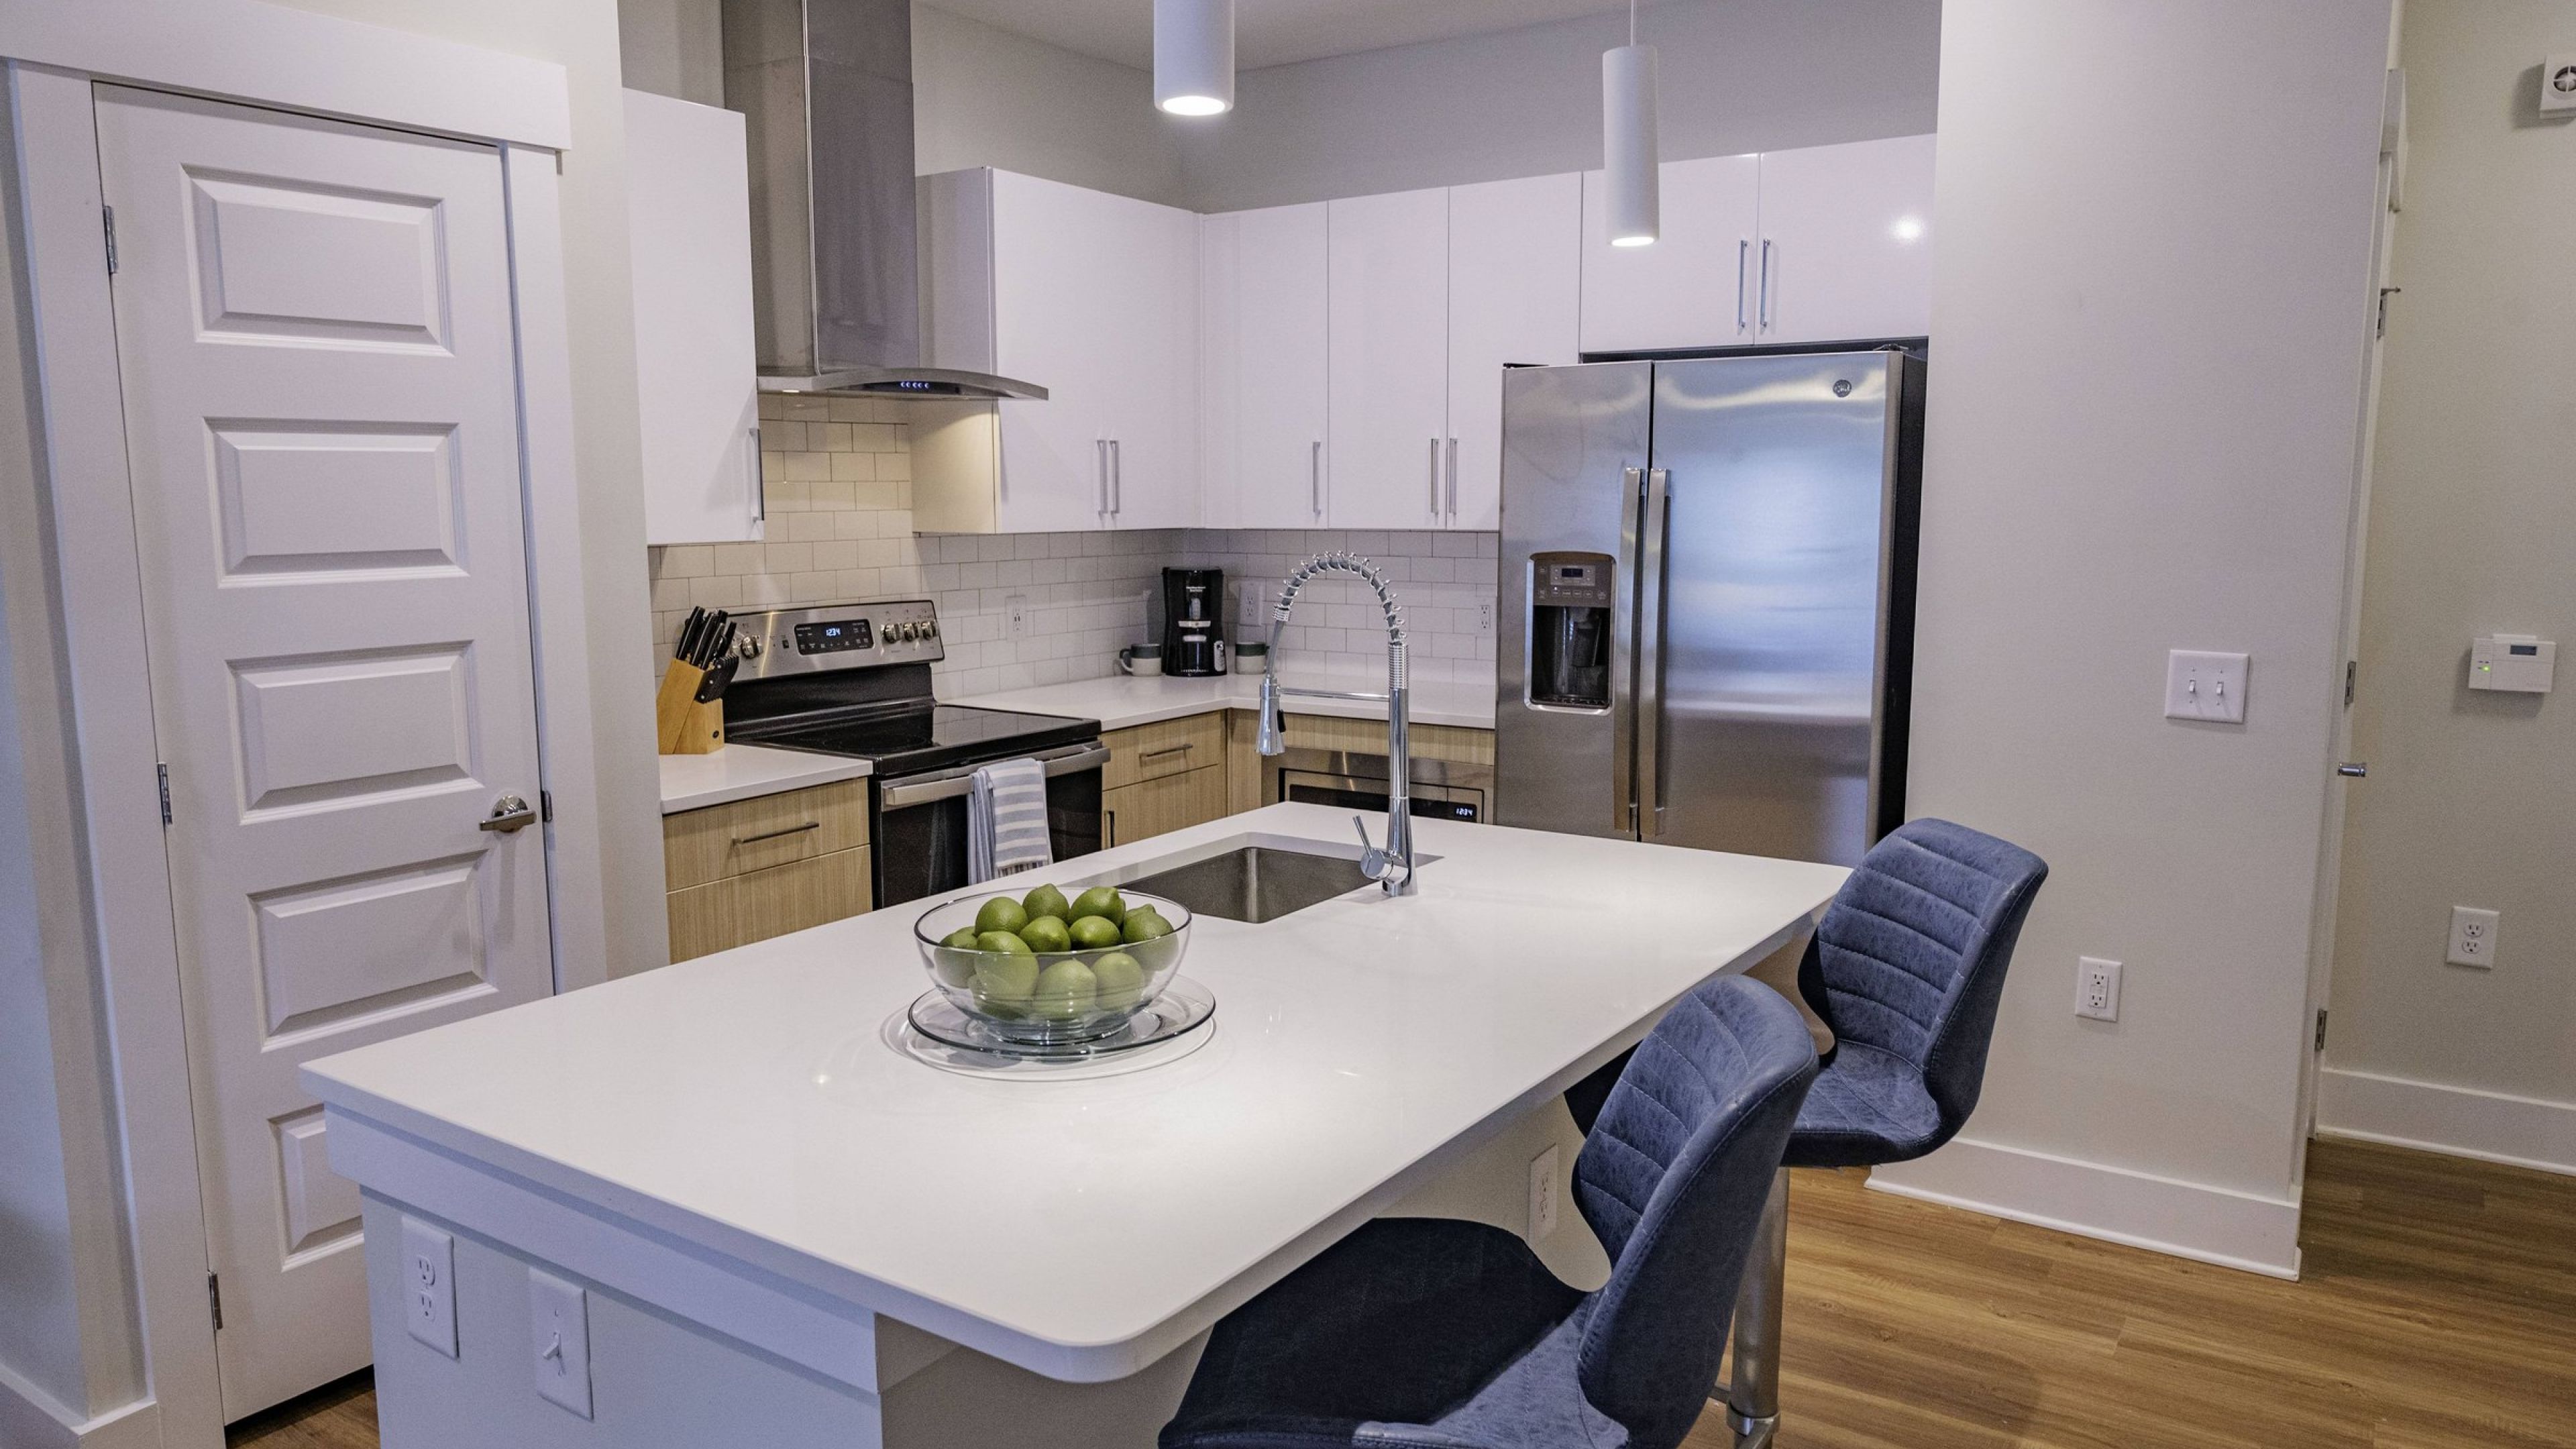 Hawthorne at Parkside luxury apartment kitchen with kitchen island, stainless steel appliances, subway tile backsplash, and designer cabinetry